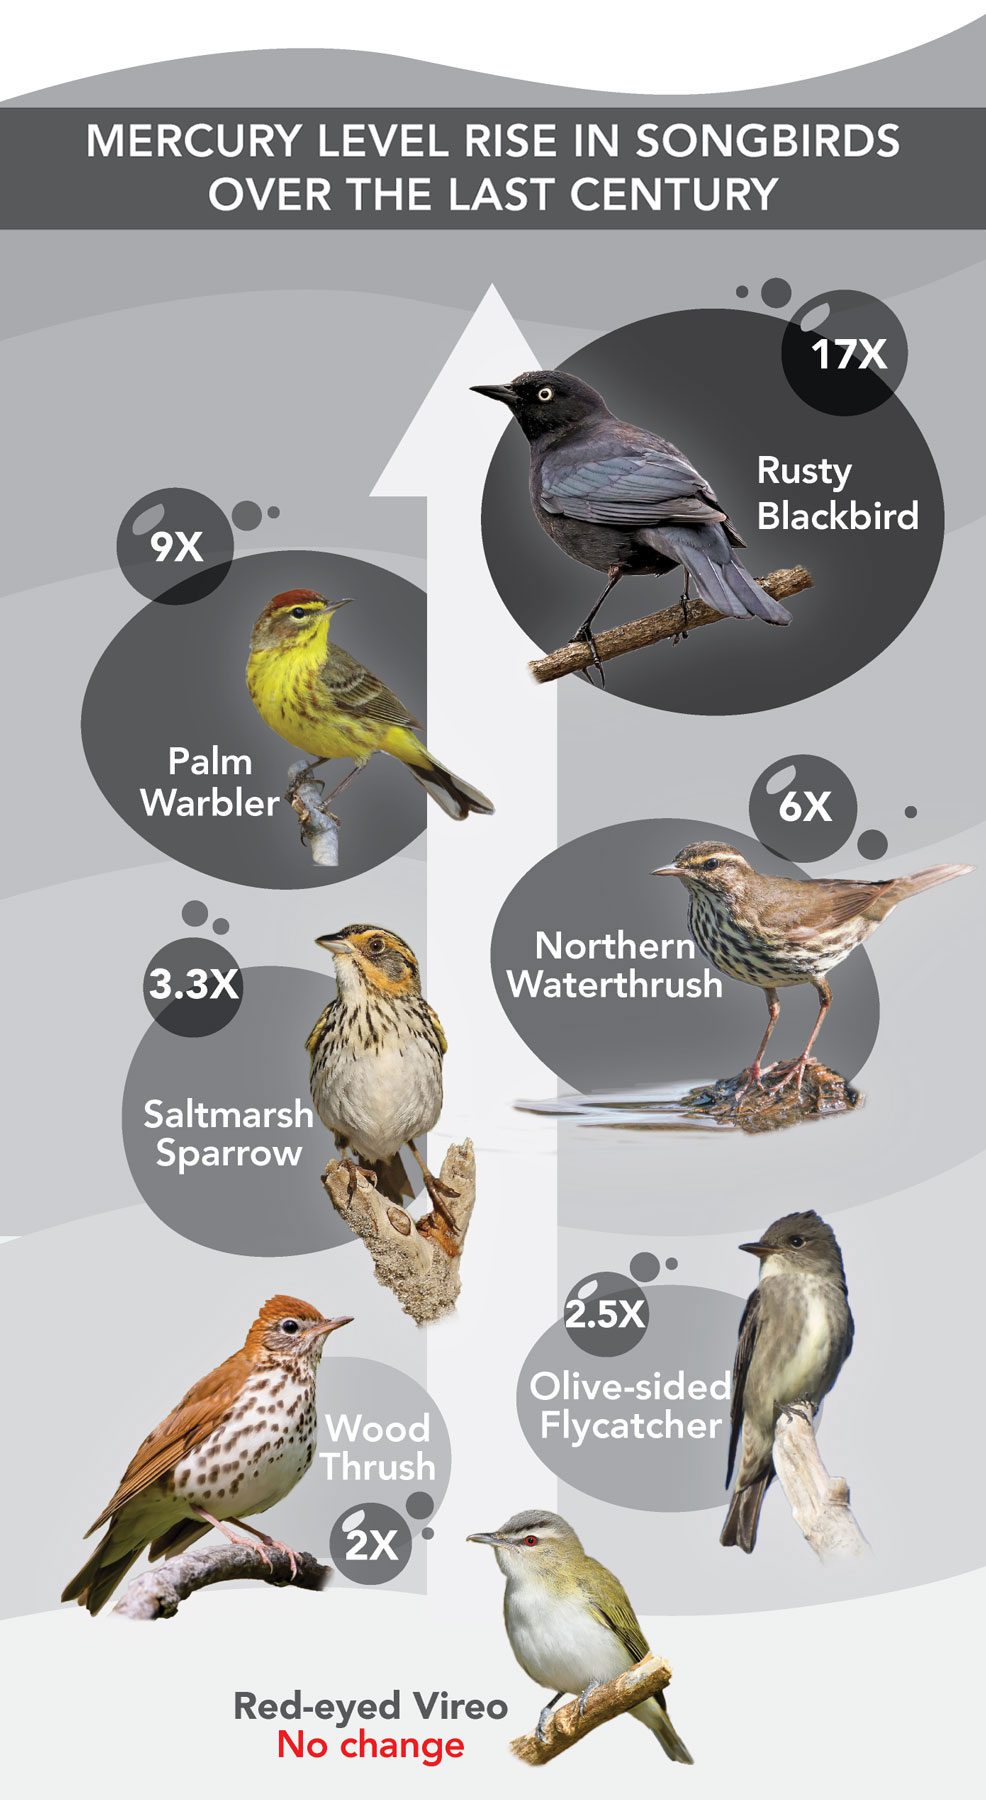 In research by University of Wisconsin–Stevens Point ecologist Marie Perkins, et al., six of seven songbird species studied showed increasing mercury levels over the past 100 years. Those six species also have declining populations in North America, whereas the lone species that didn’t exhibit increased mercury levels (Red-eyed Vireo) has an increasing population. Source: Historical patterns in mercury exposure for North American songbirds, Ecotoxicology, Oct. 2020. Infographic by Jillian Ditner. Macaulay Library photos: Rusty Blackbird by Brad Imhoff; Palm Warbler by Devin Griffiths; Northern Waterthrush by Derek Hameister; Saltmarsh Sparrow by Ryan Schain; Olive-sided Flycatcher by Gordon Karre; Wood Thrush by Matthew Plante; Red-eyed Vireo by Jean Guy Chouinard.